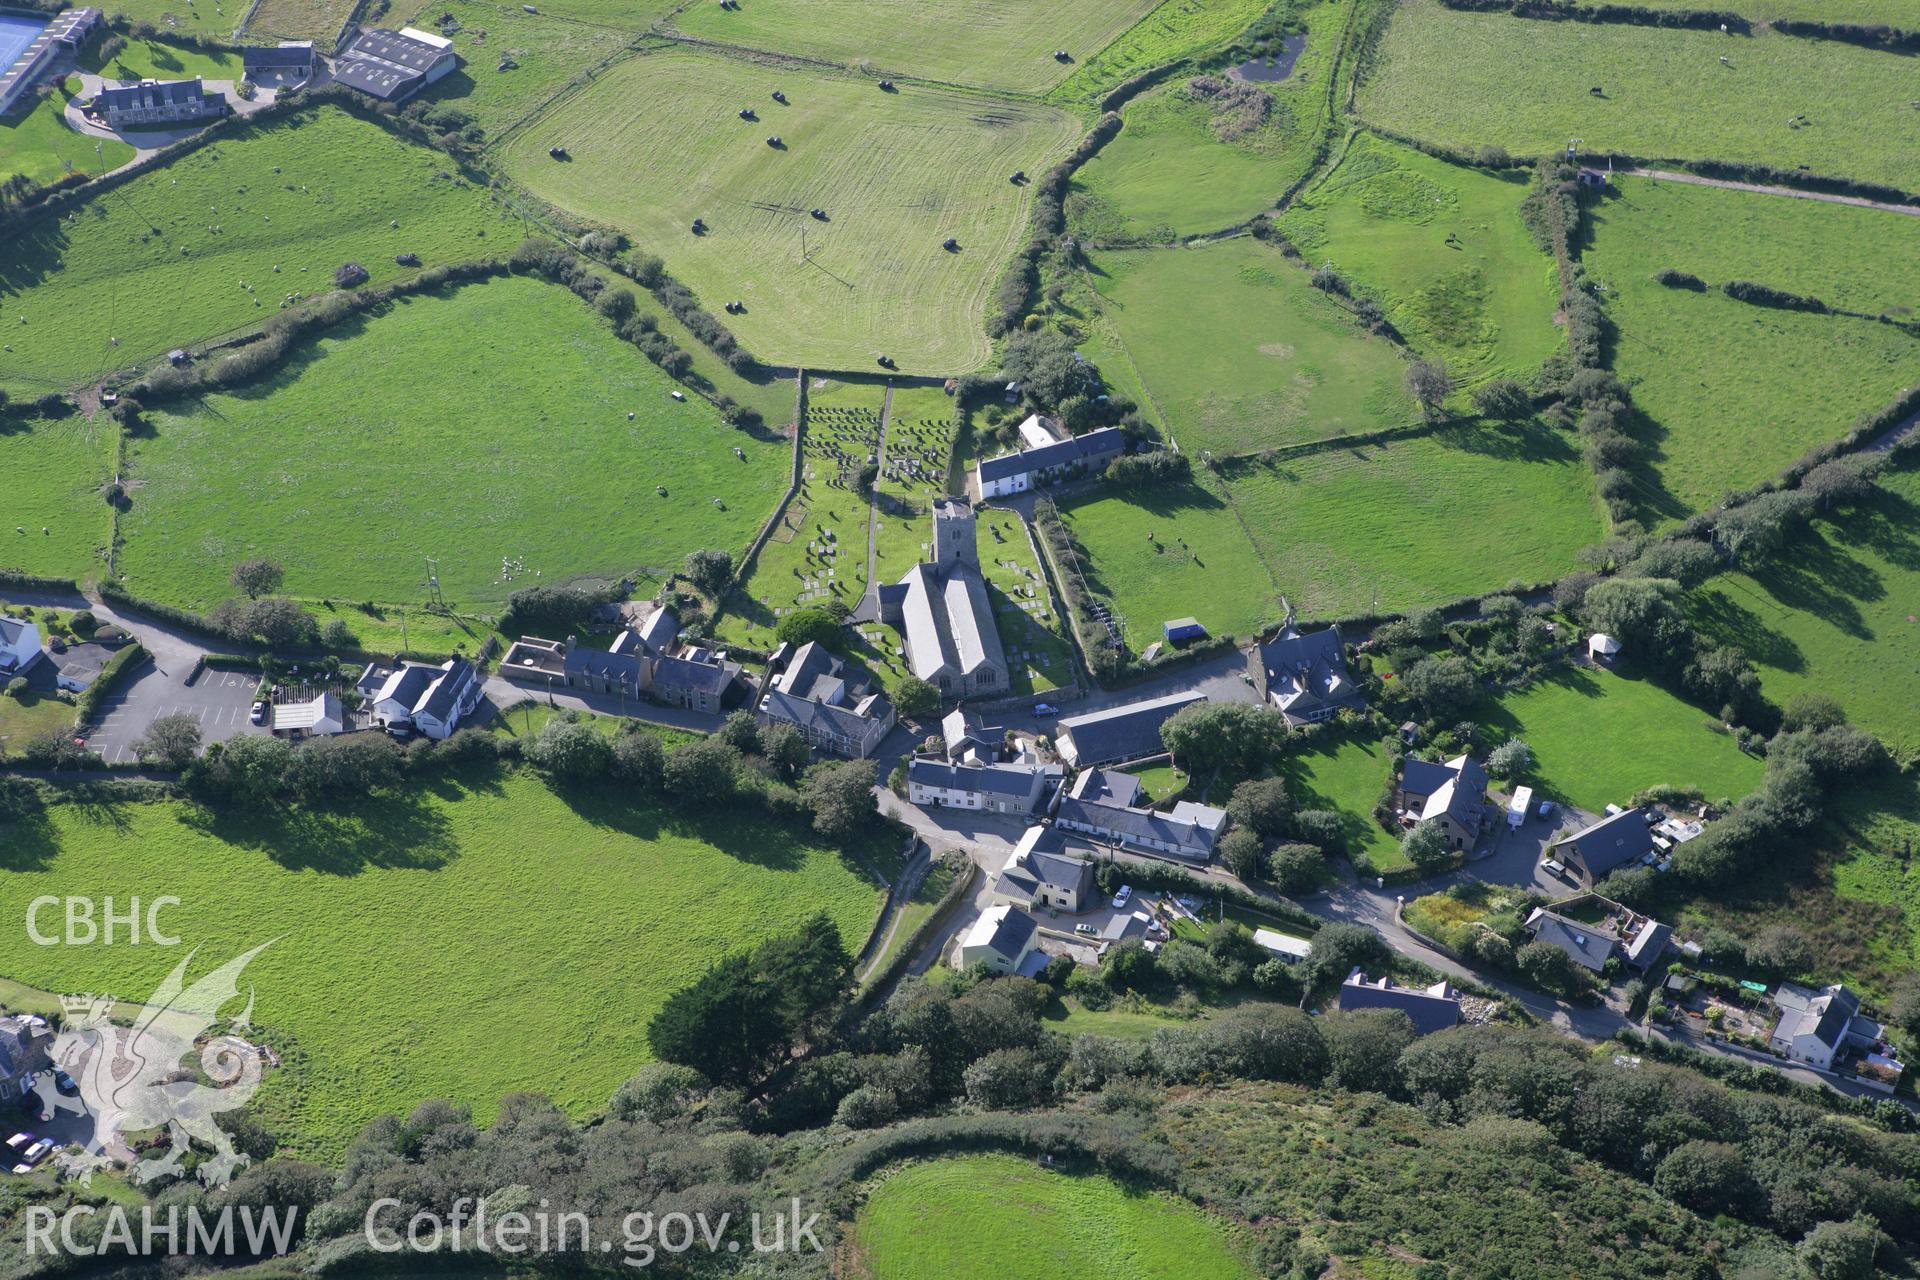 RCAHMW colour oblique aerial photograph of Llanengan Parish Church and village. Taken on 06 September 2007 by Toby Driver